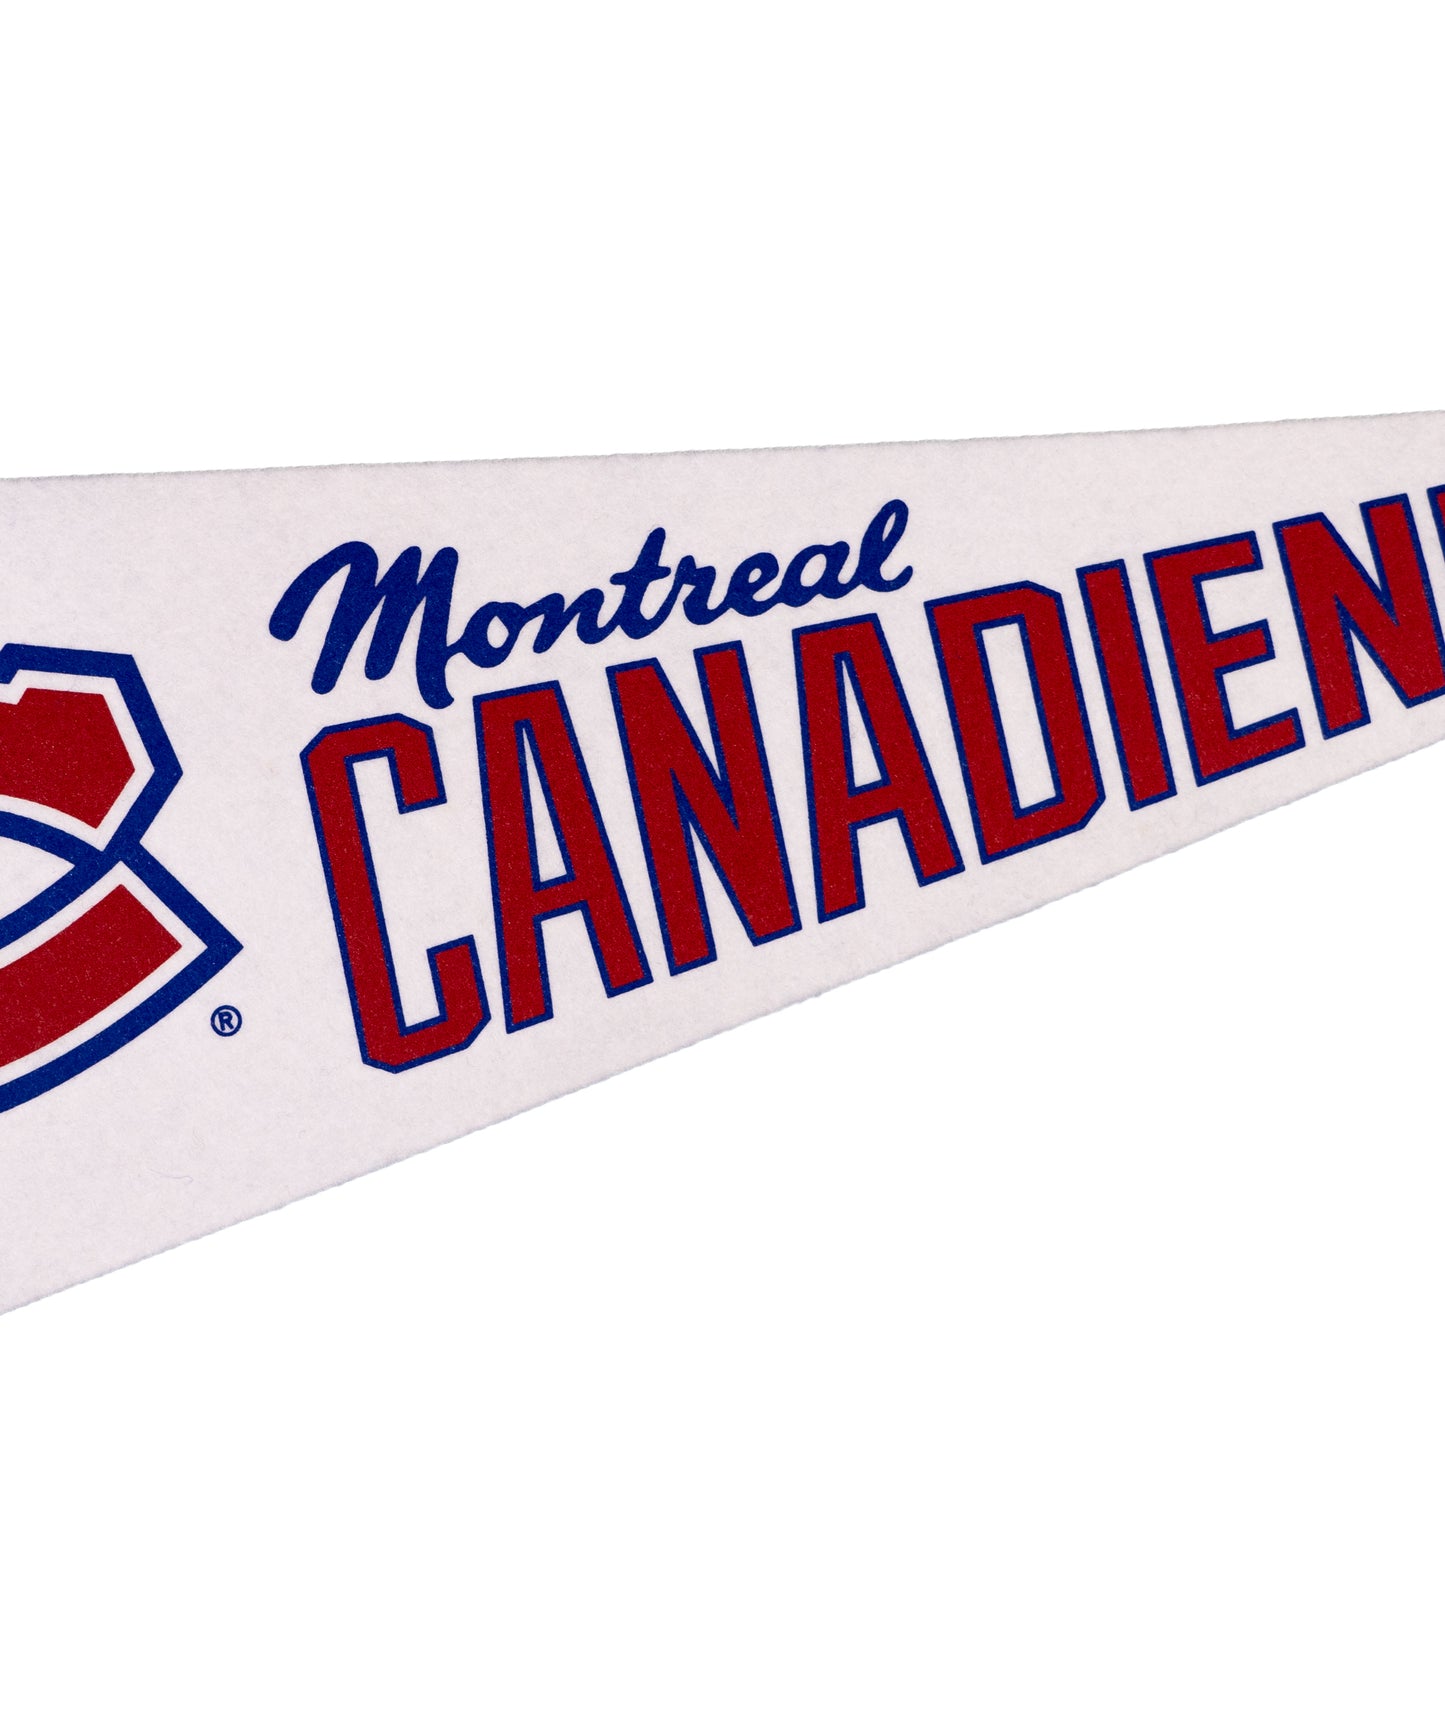 Montreal Canadiens Pennant • NHL x Oxford Pennant